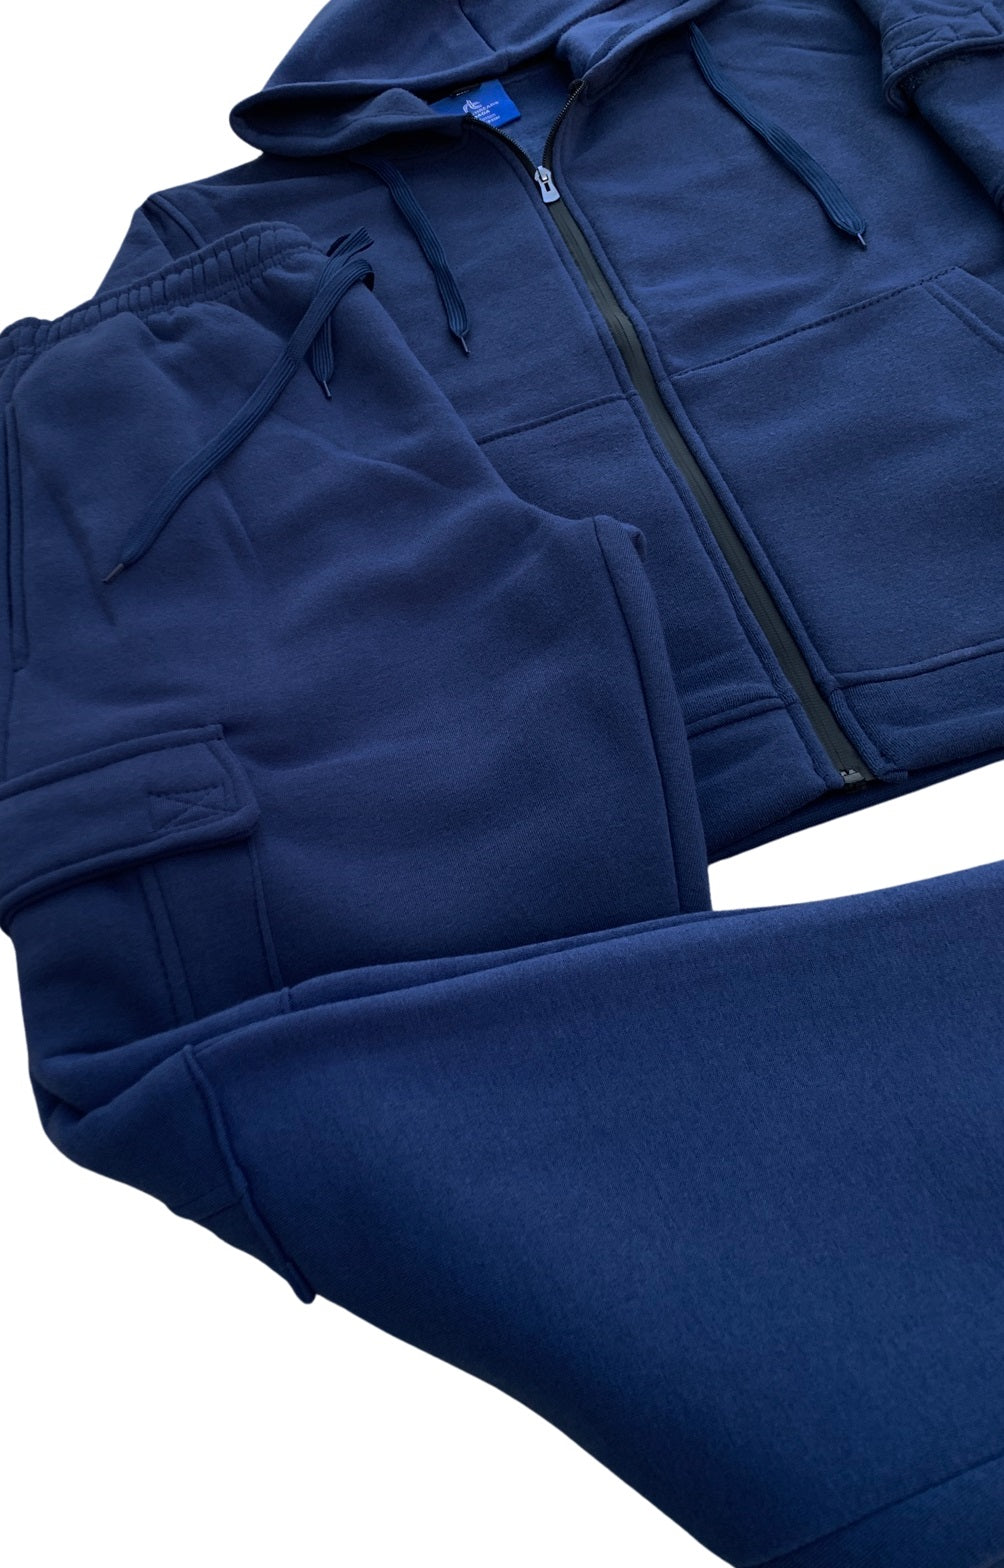 Men Fleece Jogger Sweatsuit with utility Cargo Pockets Sweat jacket and Sweatpants Outfit